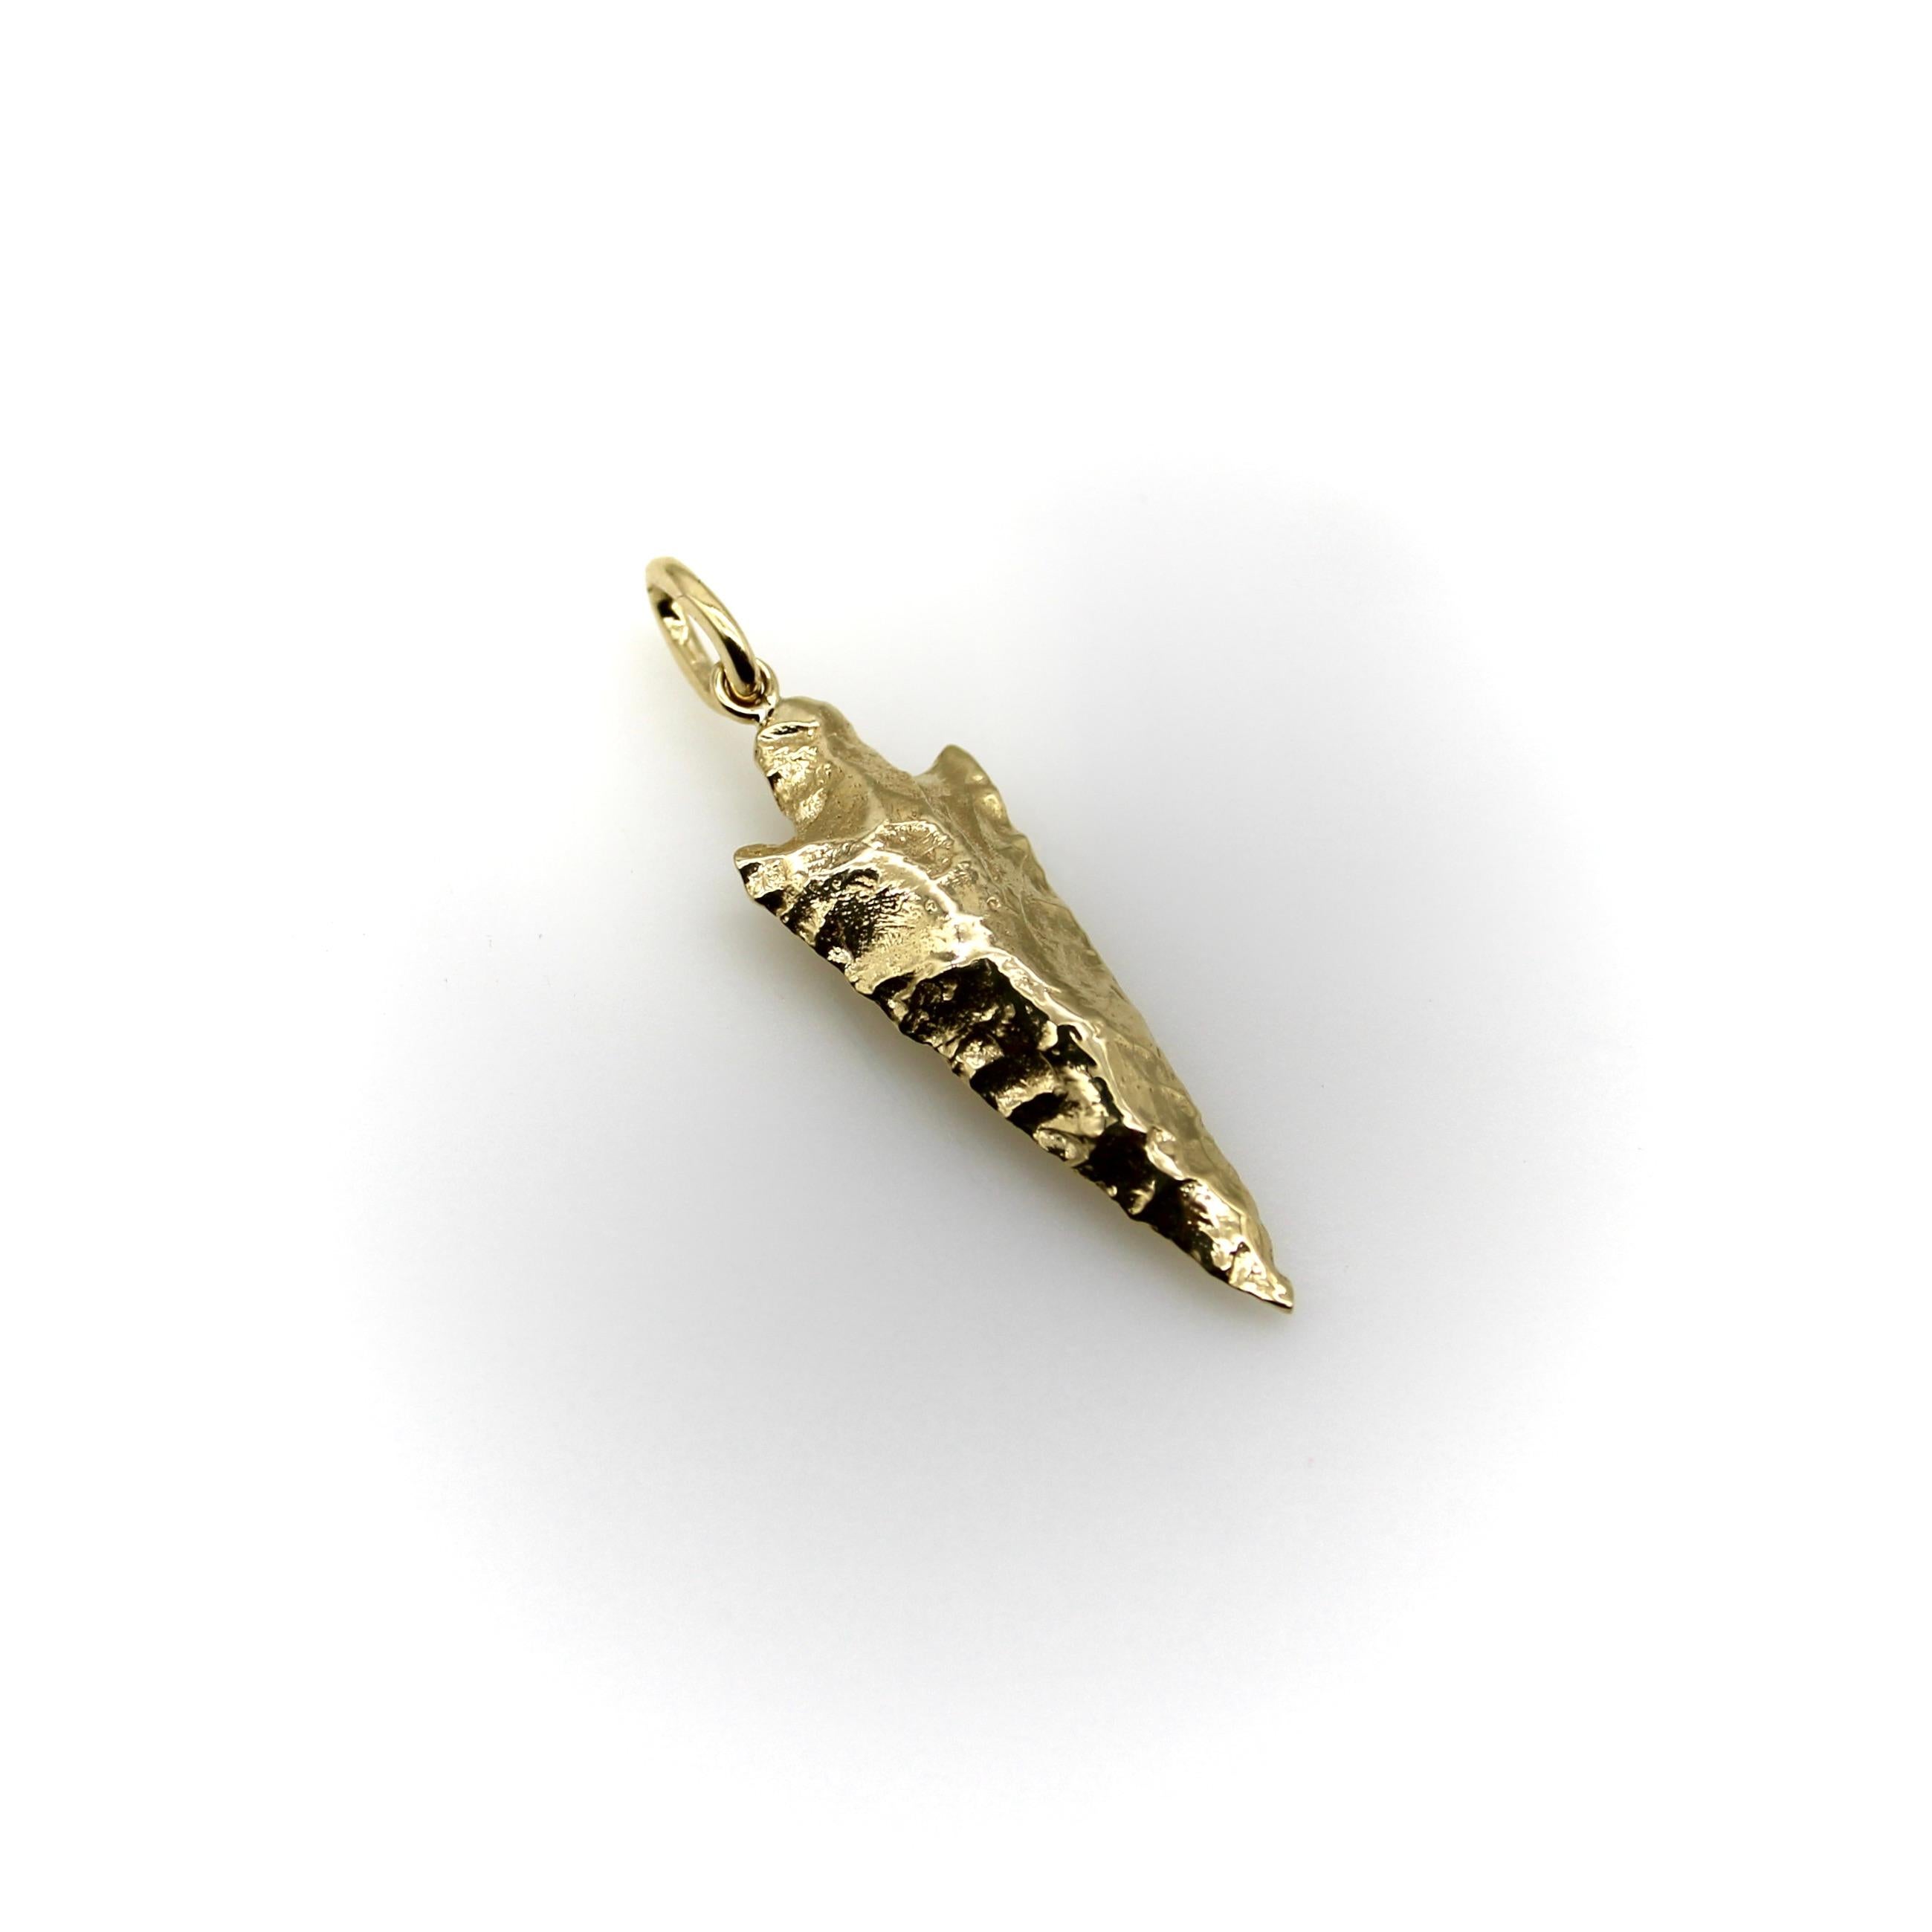 Part of Kirsten’s Corner Signature Collection, this 14k gold elongated arrowhead charm was cast from a mold created using an actual arrowhead. We loved the way the original arrowhead presented itself in gold—the facets of hard rock created beautiful